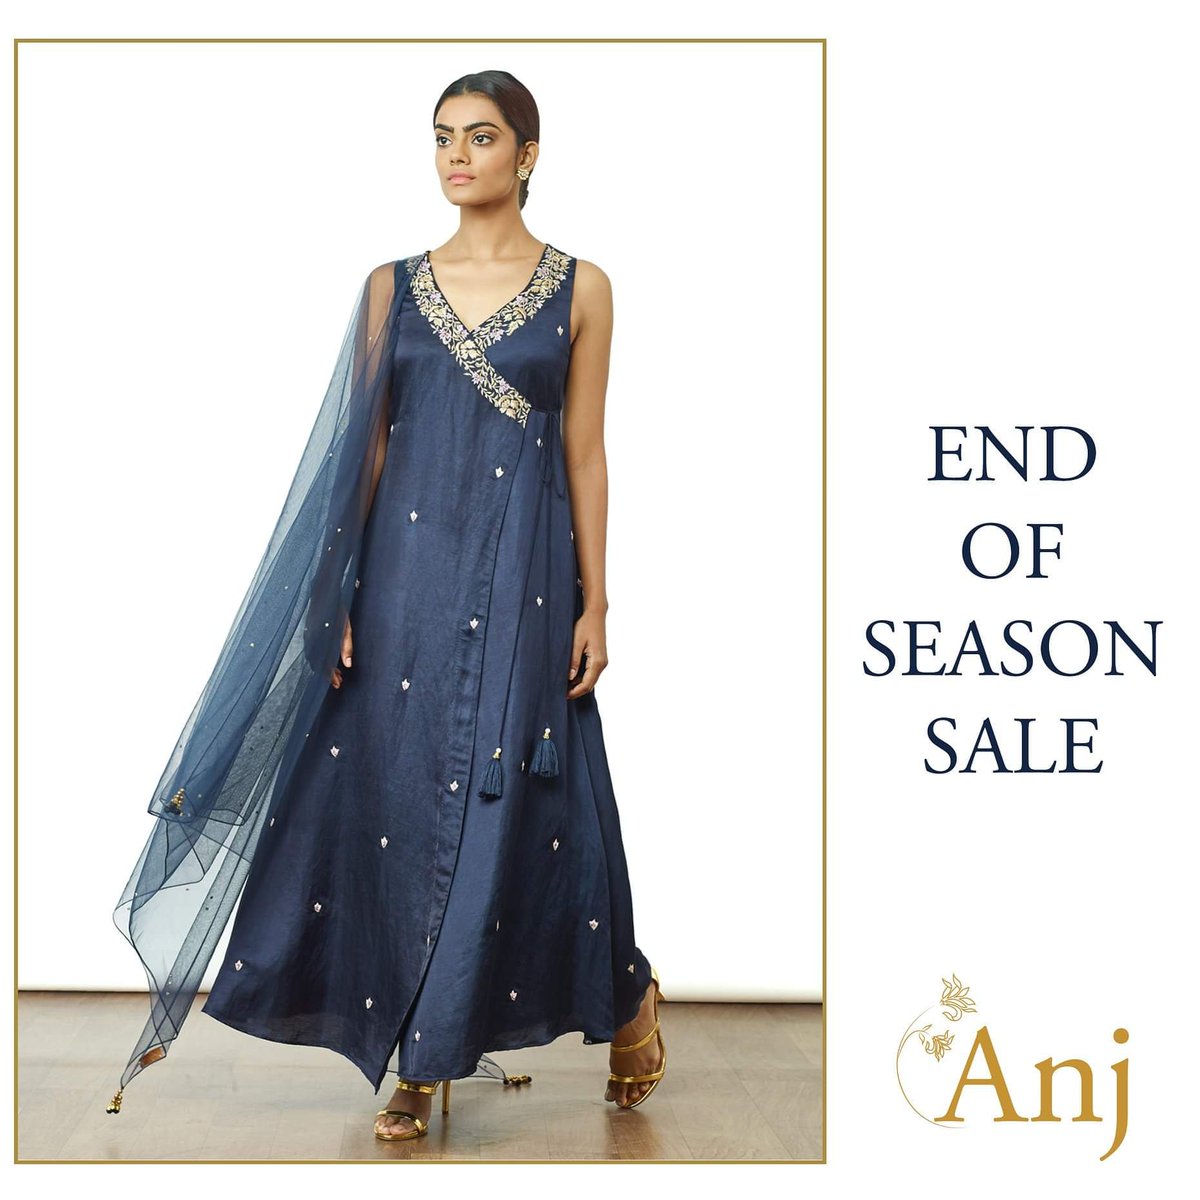 This elegant navy angrakha paired with silk pants and a matching navy net dupatta radiates grace and class. 

#endofseasonsale #Anj #AnjIndia #Jaipur #rajasthan #rajasthaniculture #luxury #luxurypret #pret #occasionwear #festivewear #handembroidered #Indiancontemporary